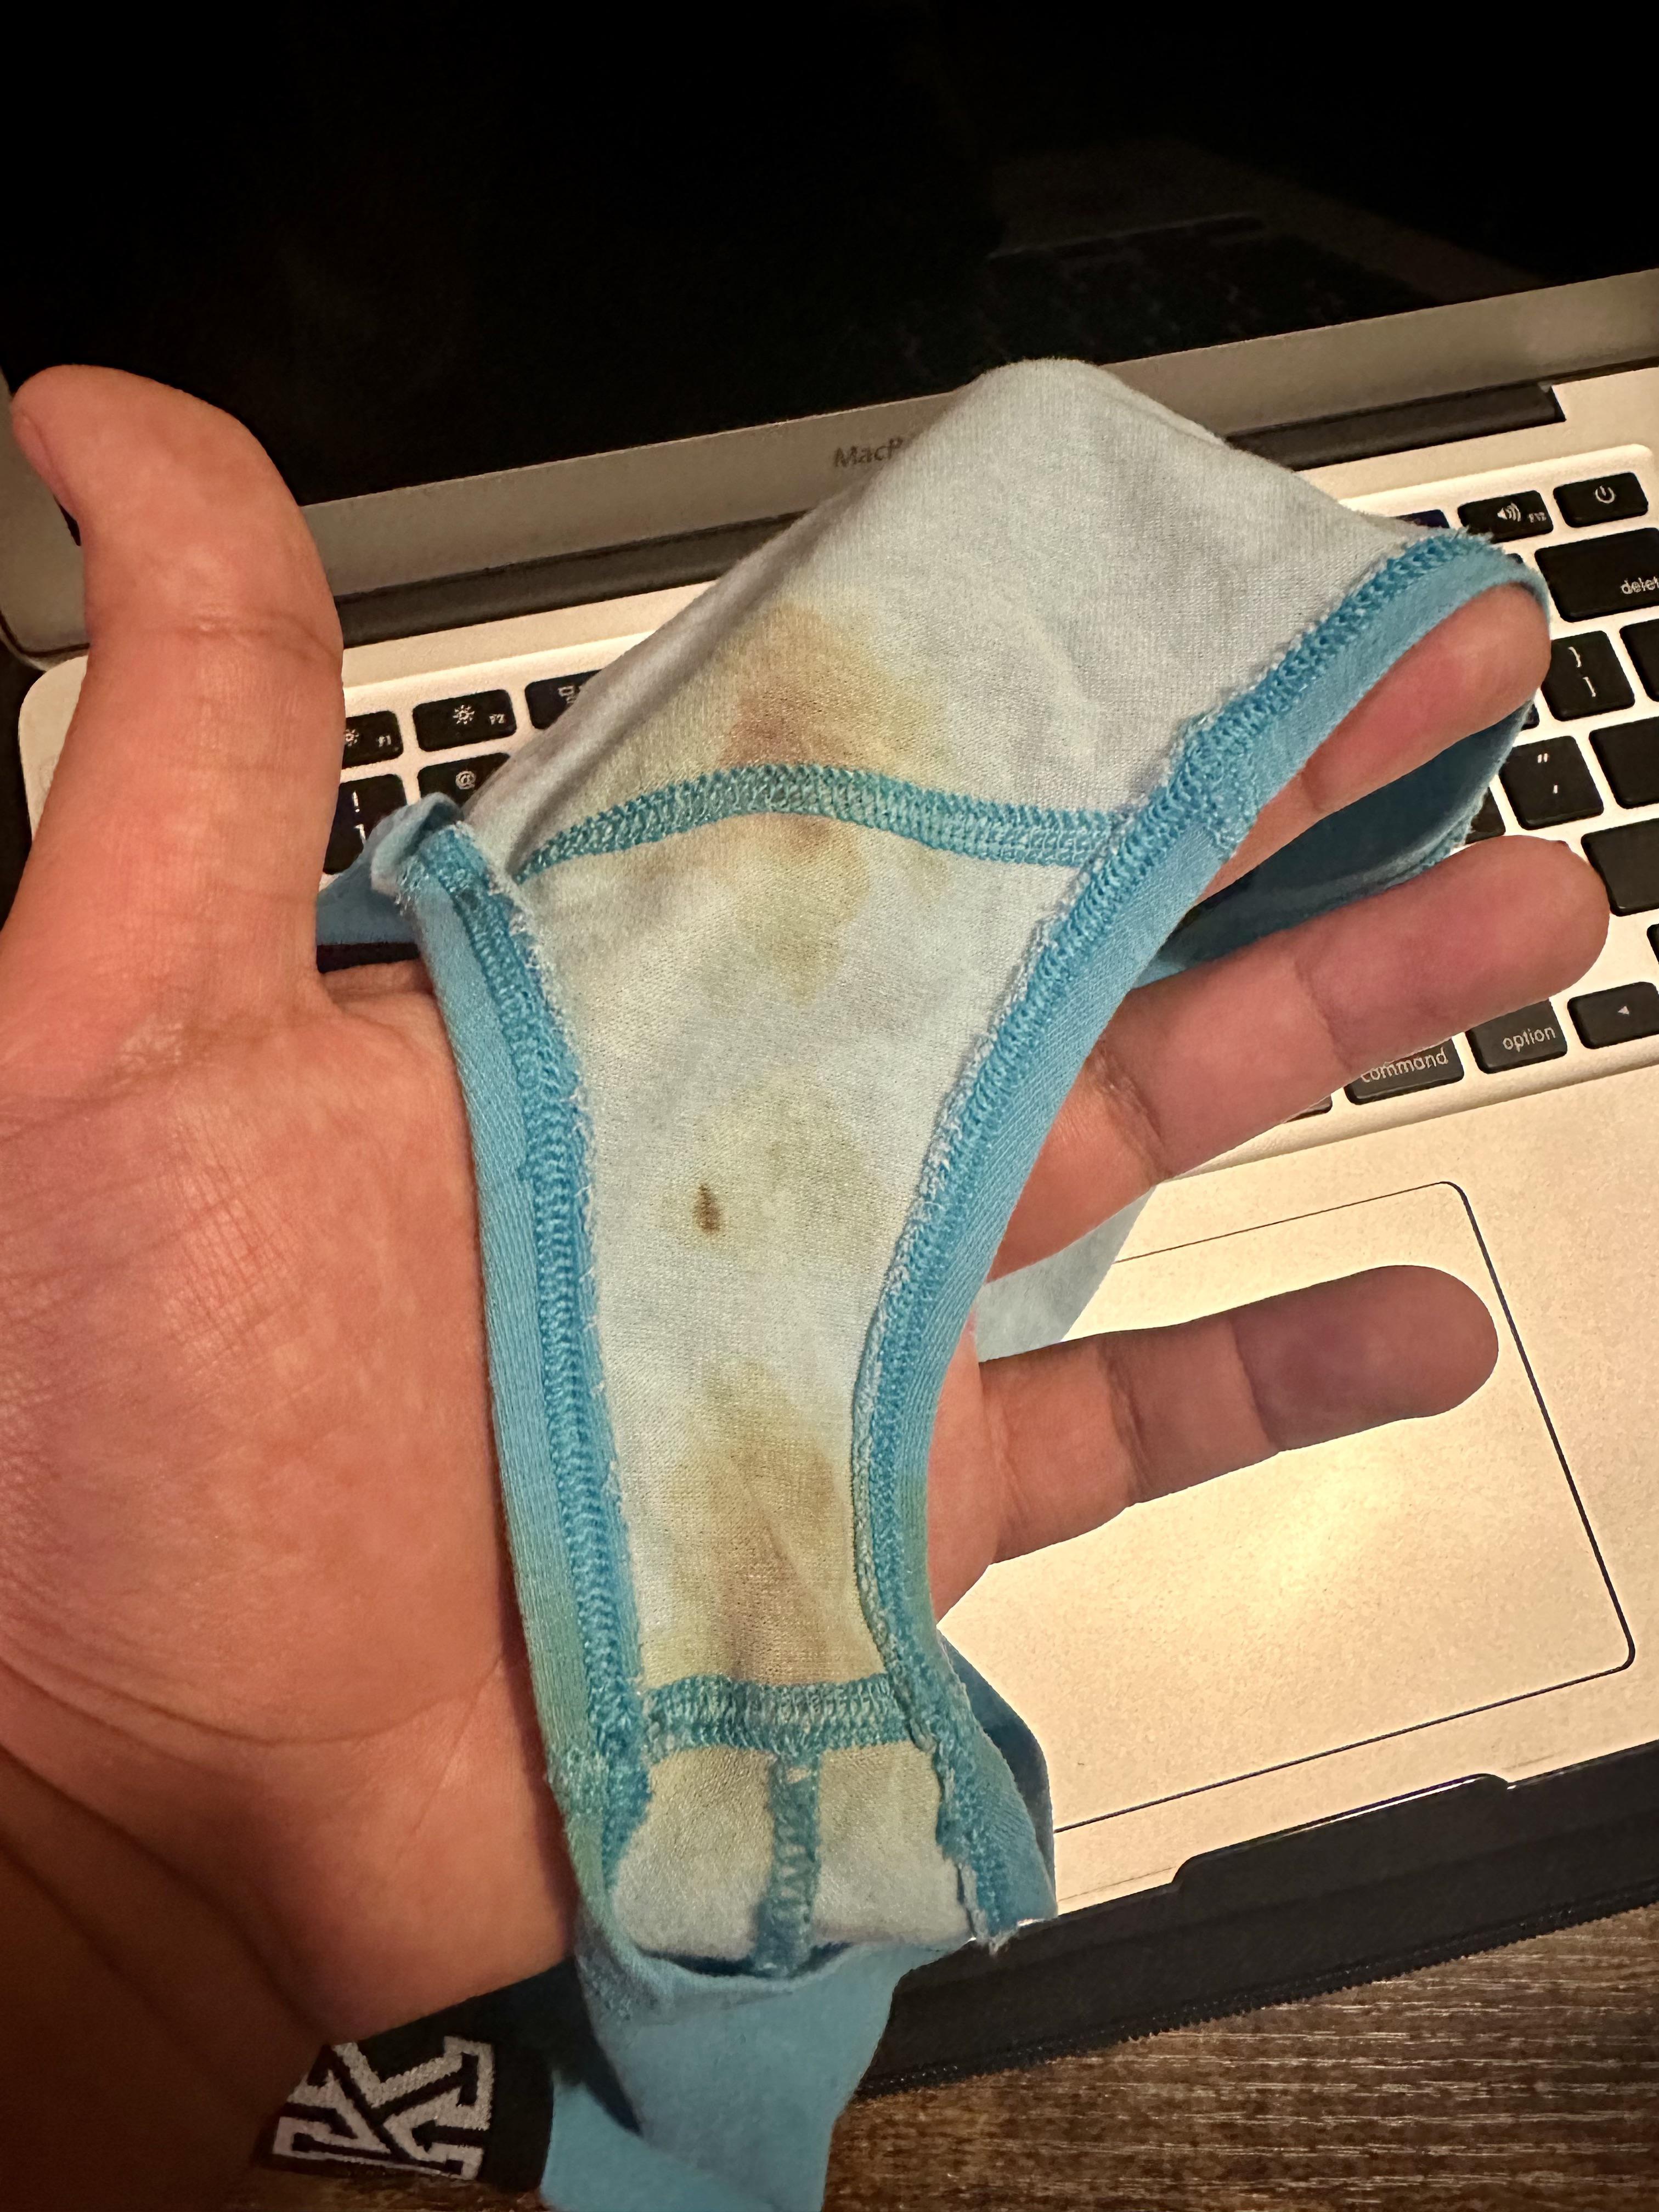 Any other guys sniff their wifes dirty panties while they stroke? pic